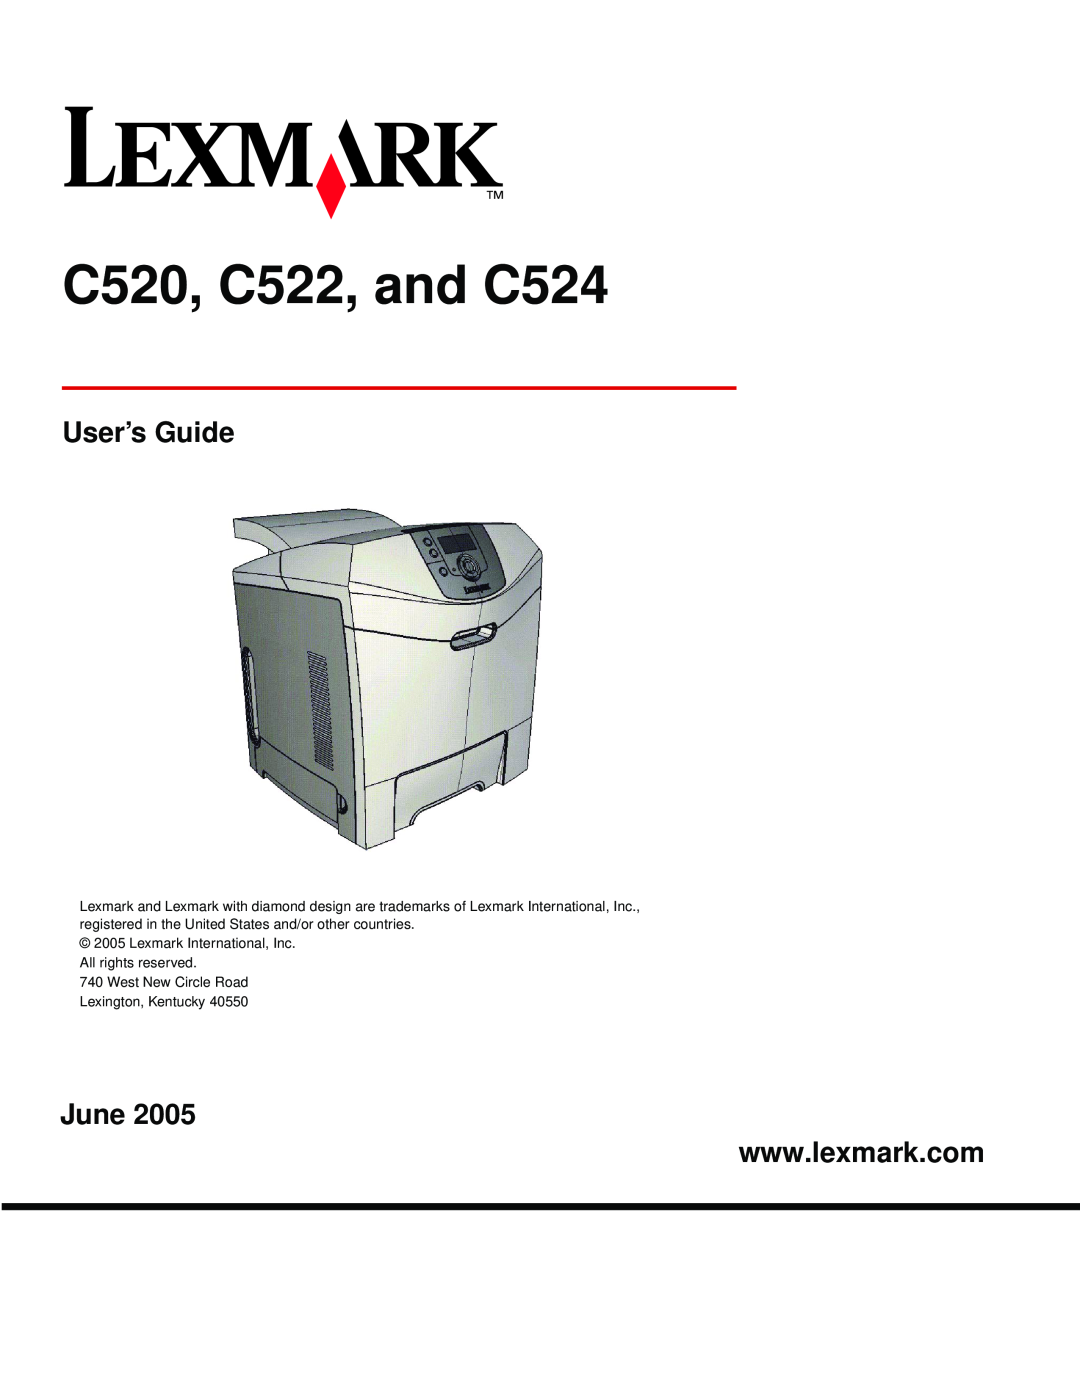 Lexmark manual C520, C522, and C524, User’s Guide, June, Lexmark International, Inc. All rights reserved 